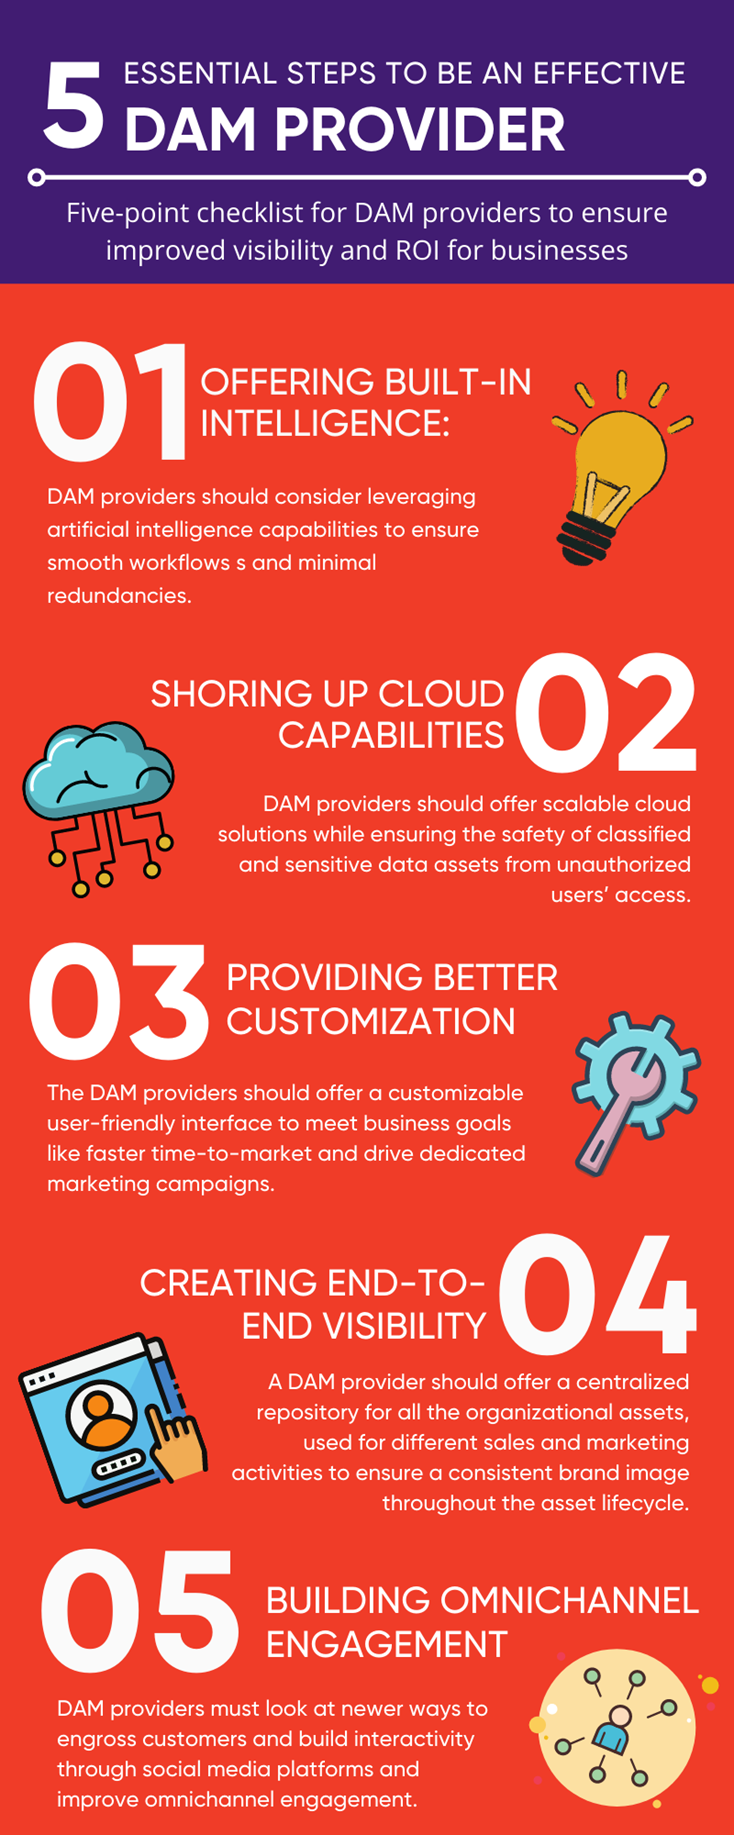 Five-point-checklist-for-DAM-providers-to-ensure-improved-visibility-and-ROI-for-businesses.png